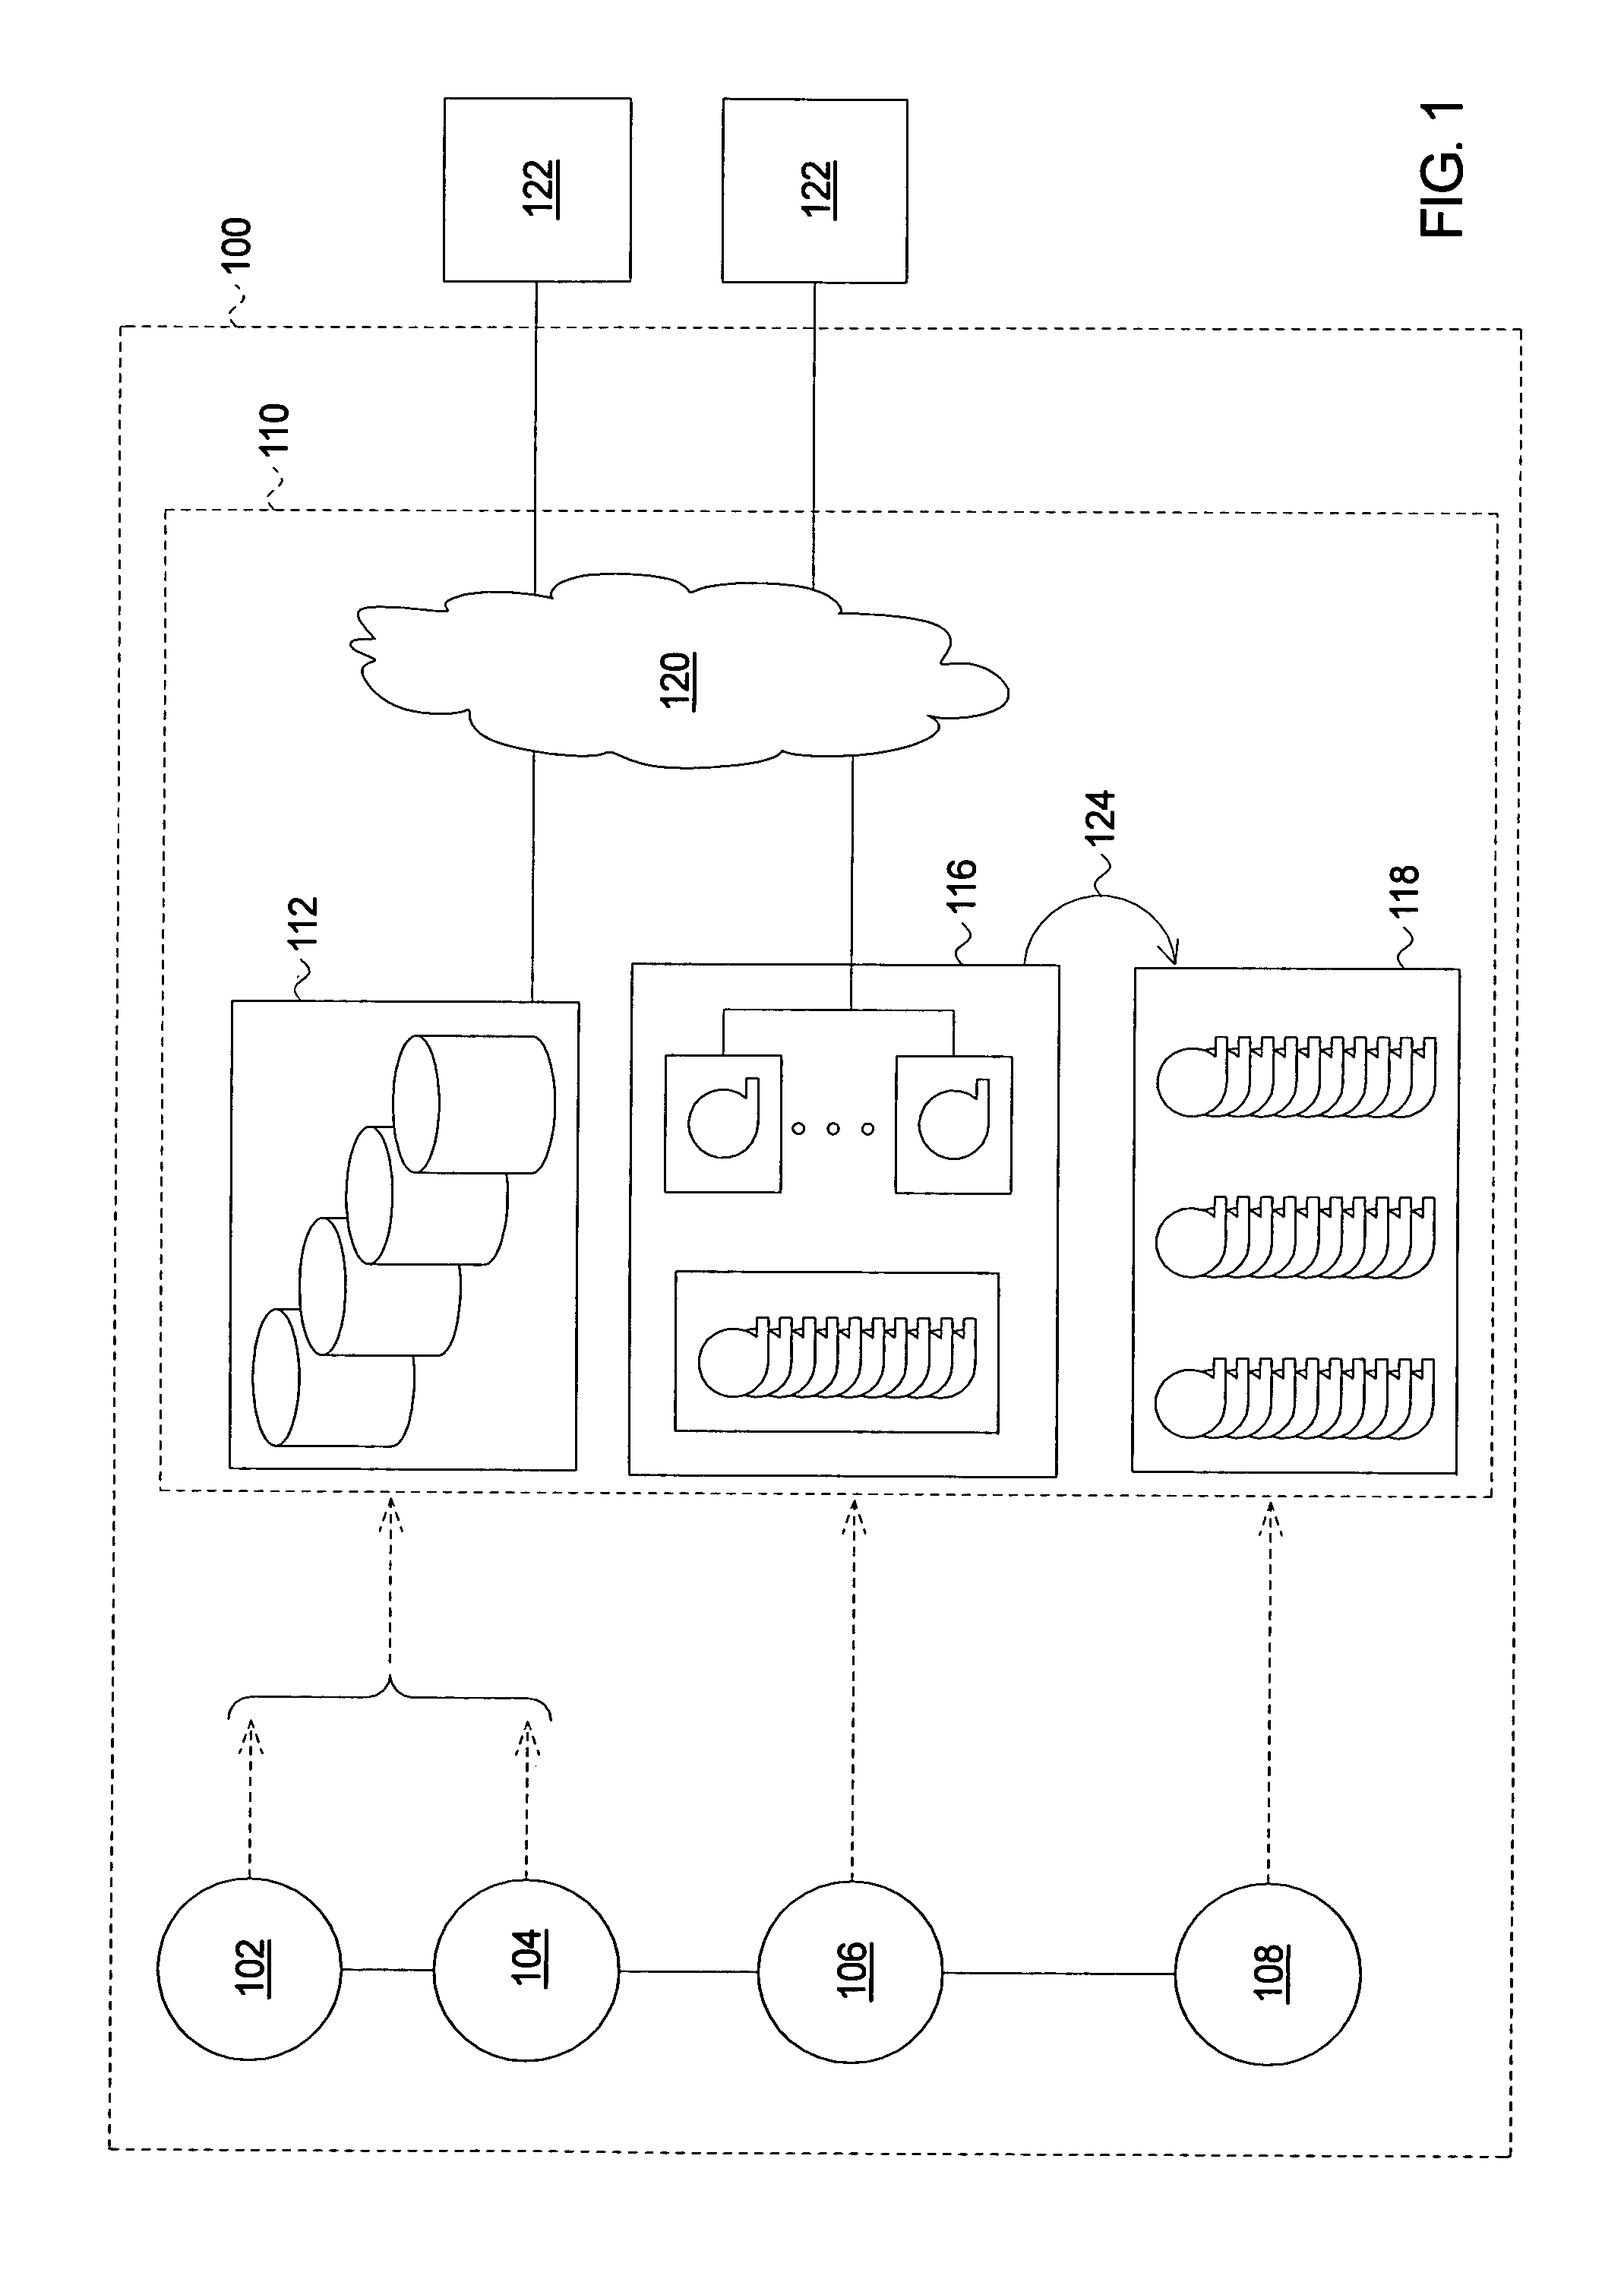 Method of estimating storage system cost